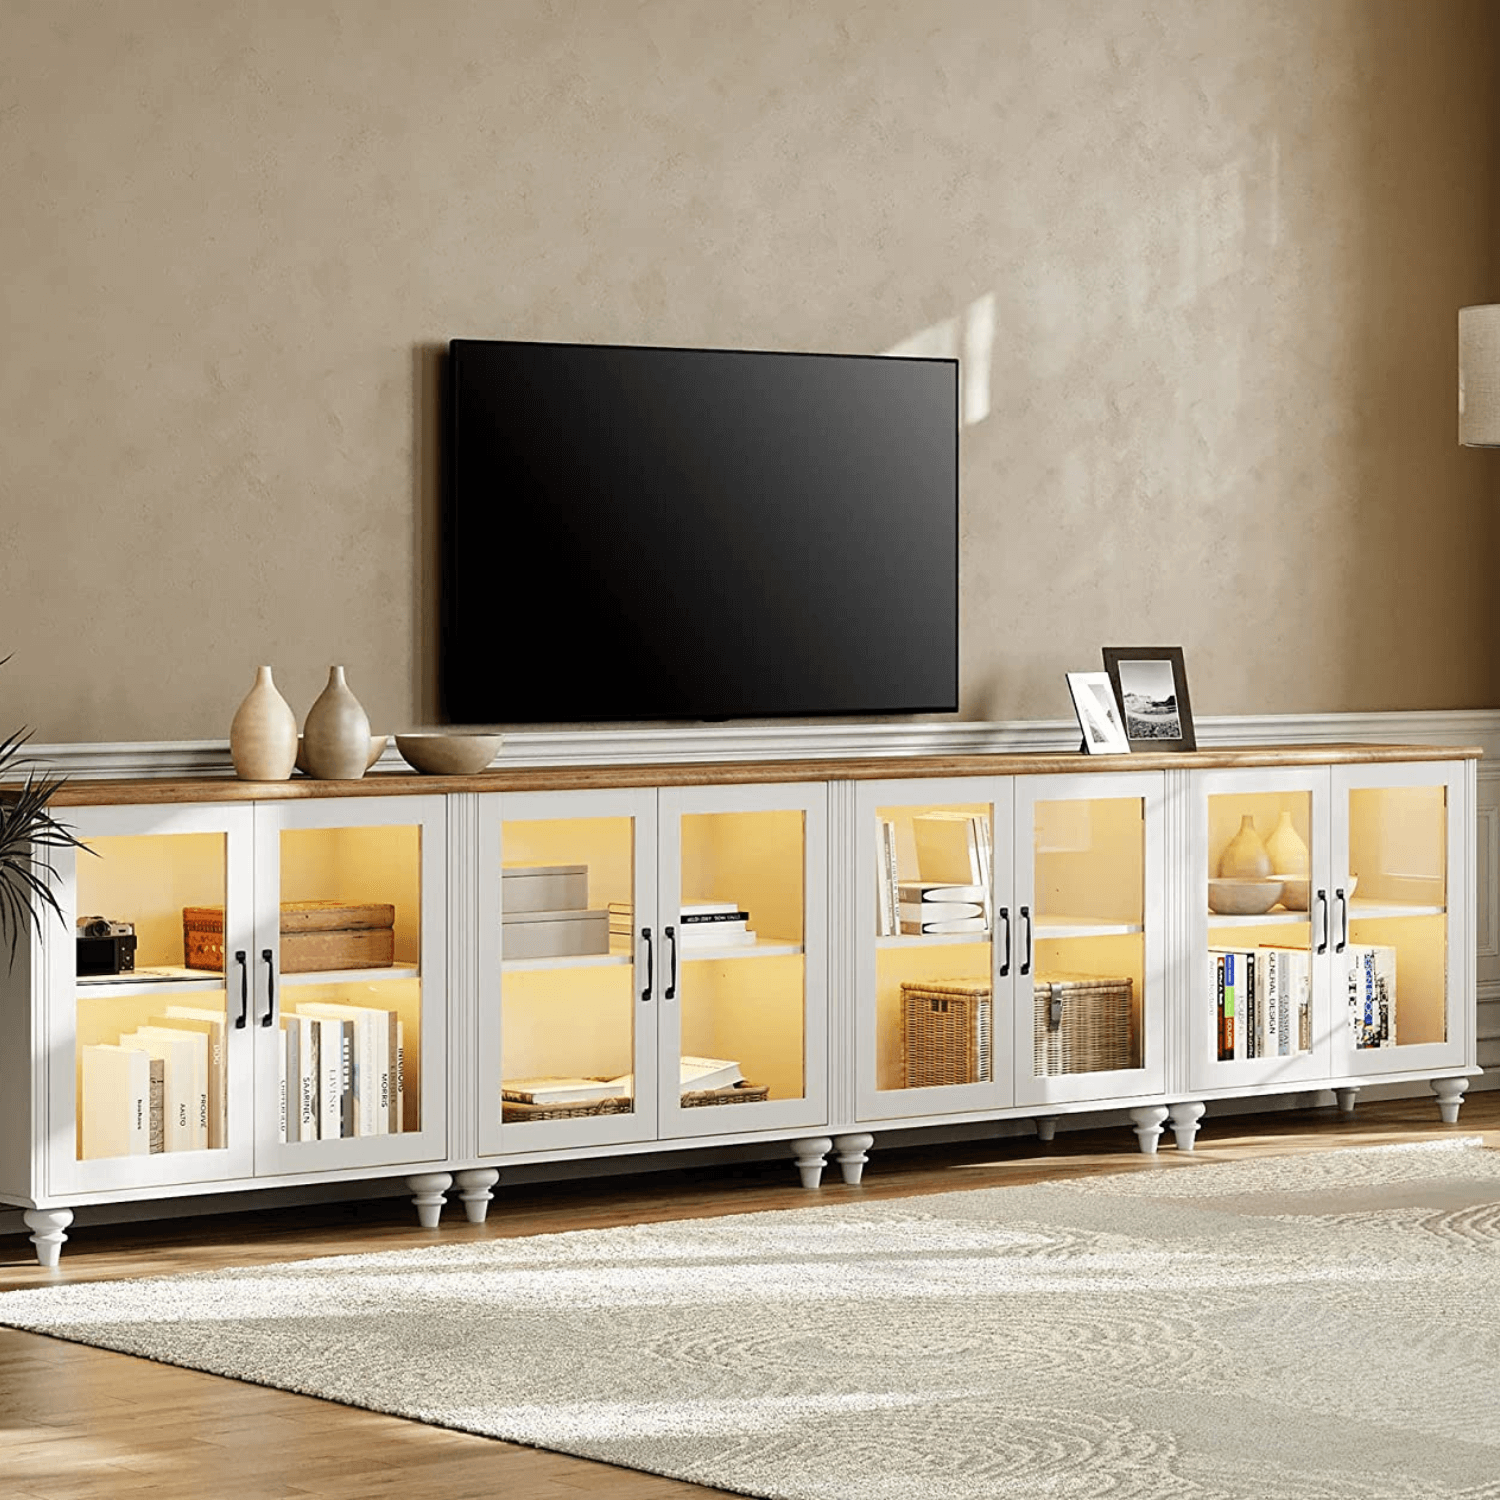 WAMPAT Large LED TV Stand for 75/80/85/90/100 Inch TV, 4-in-1 Kitchen Buffet Cabinet with Glass Door for Dining Room & Living Room, Off White